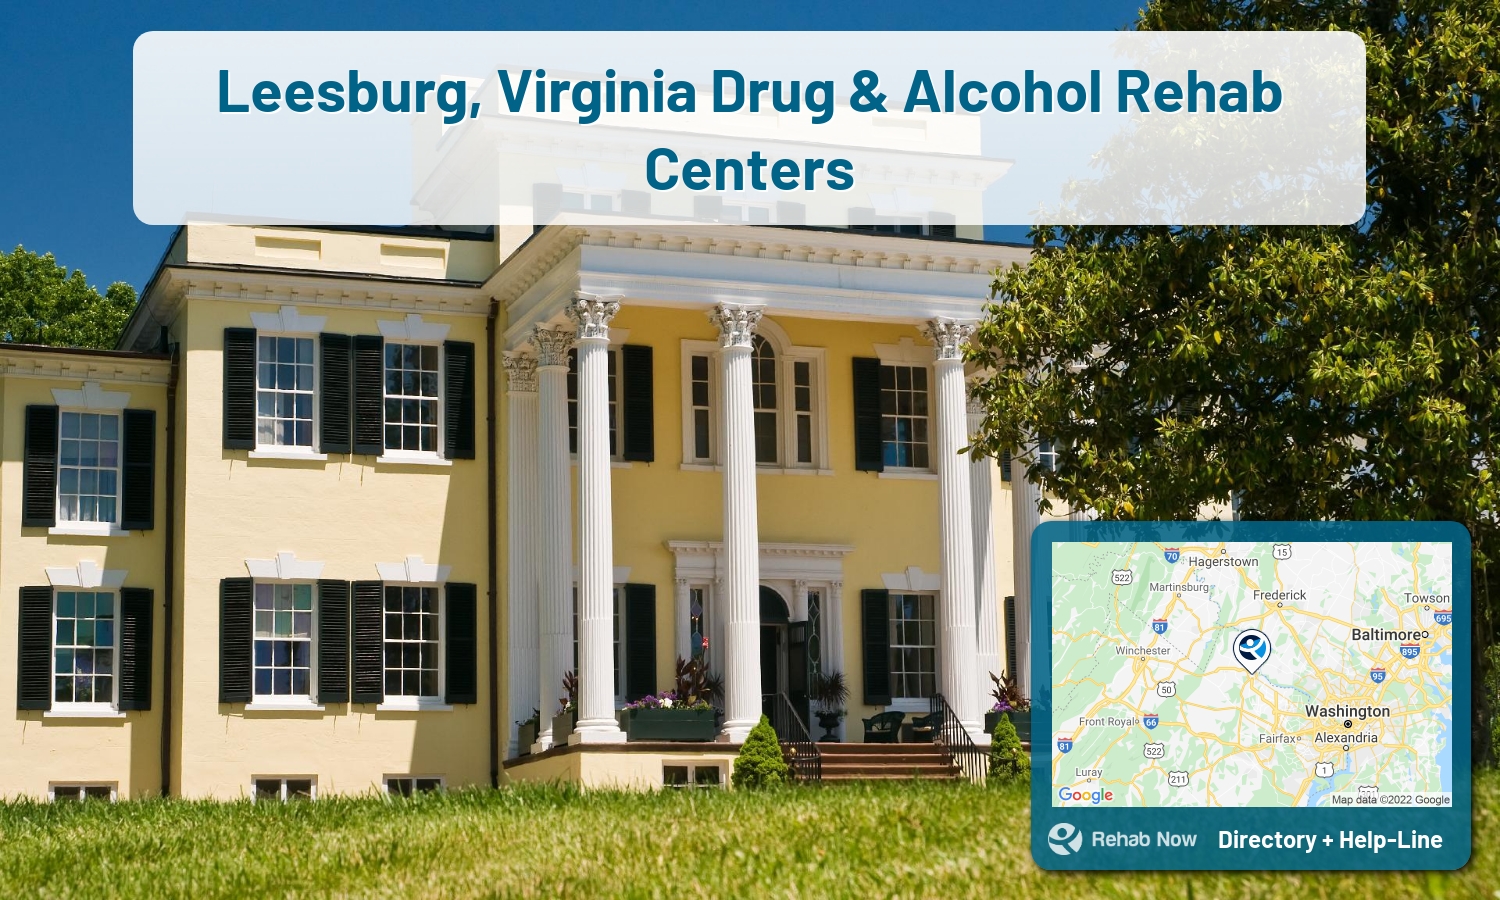 Leesburg, VA Treatment Centers. Find drug rehab in Leesburg, Virginia, or detox and treatment programs. Get the right help now!